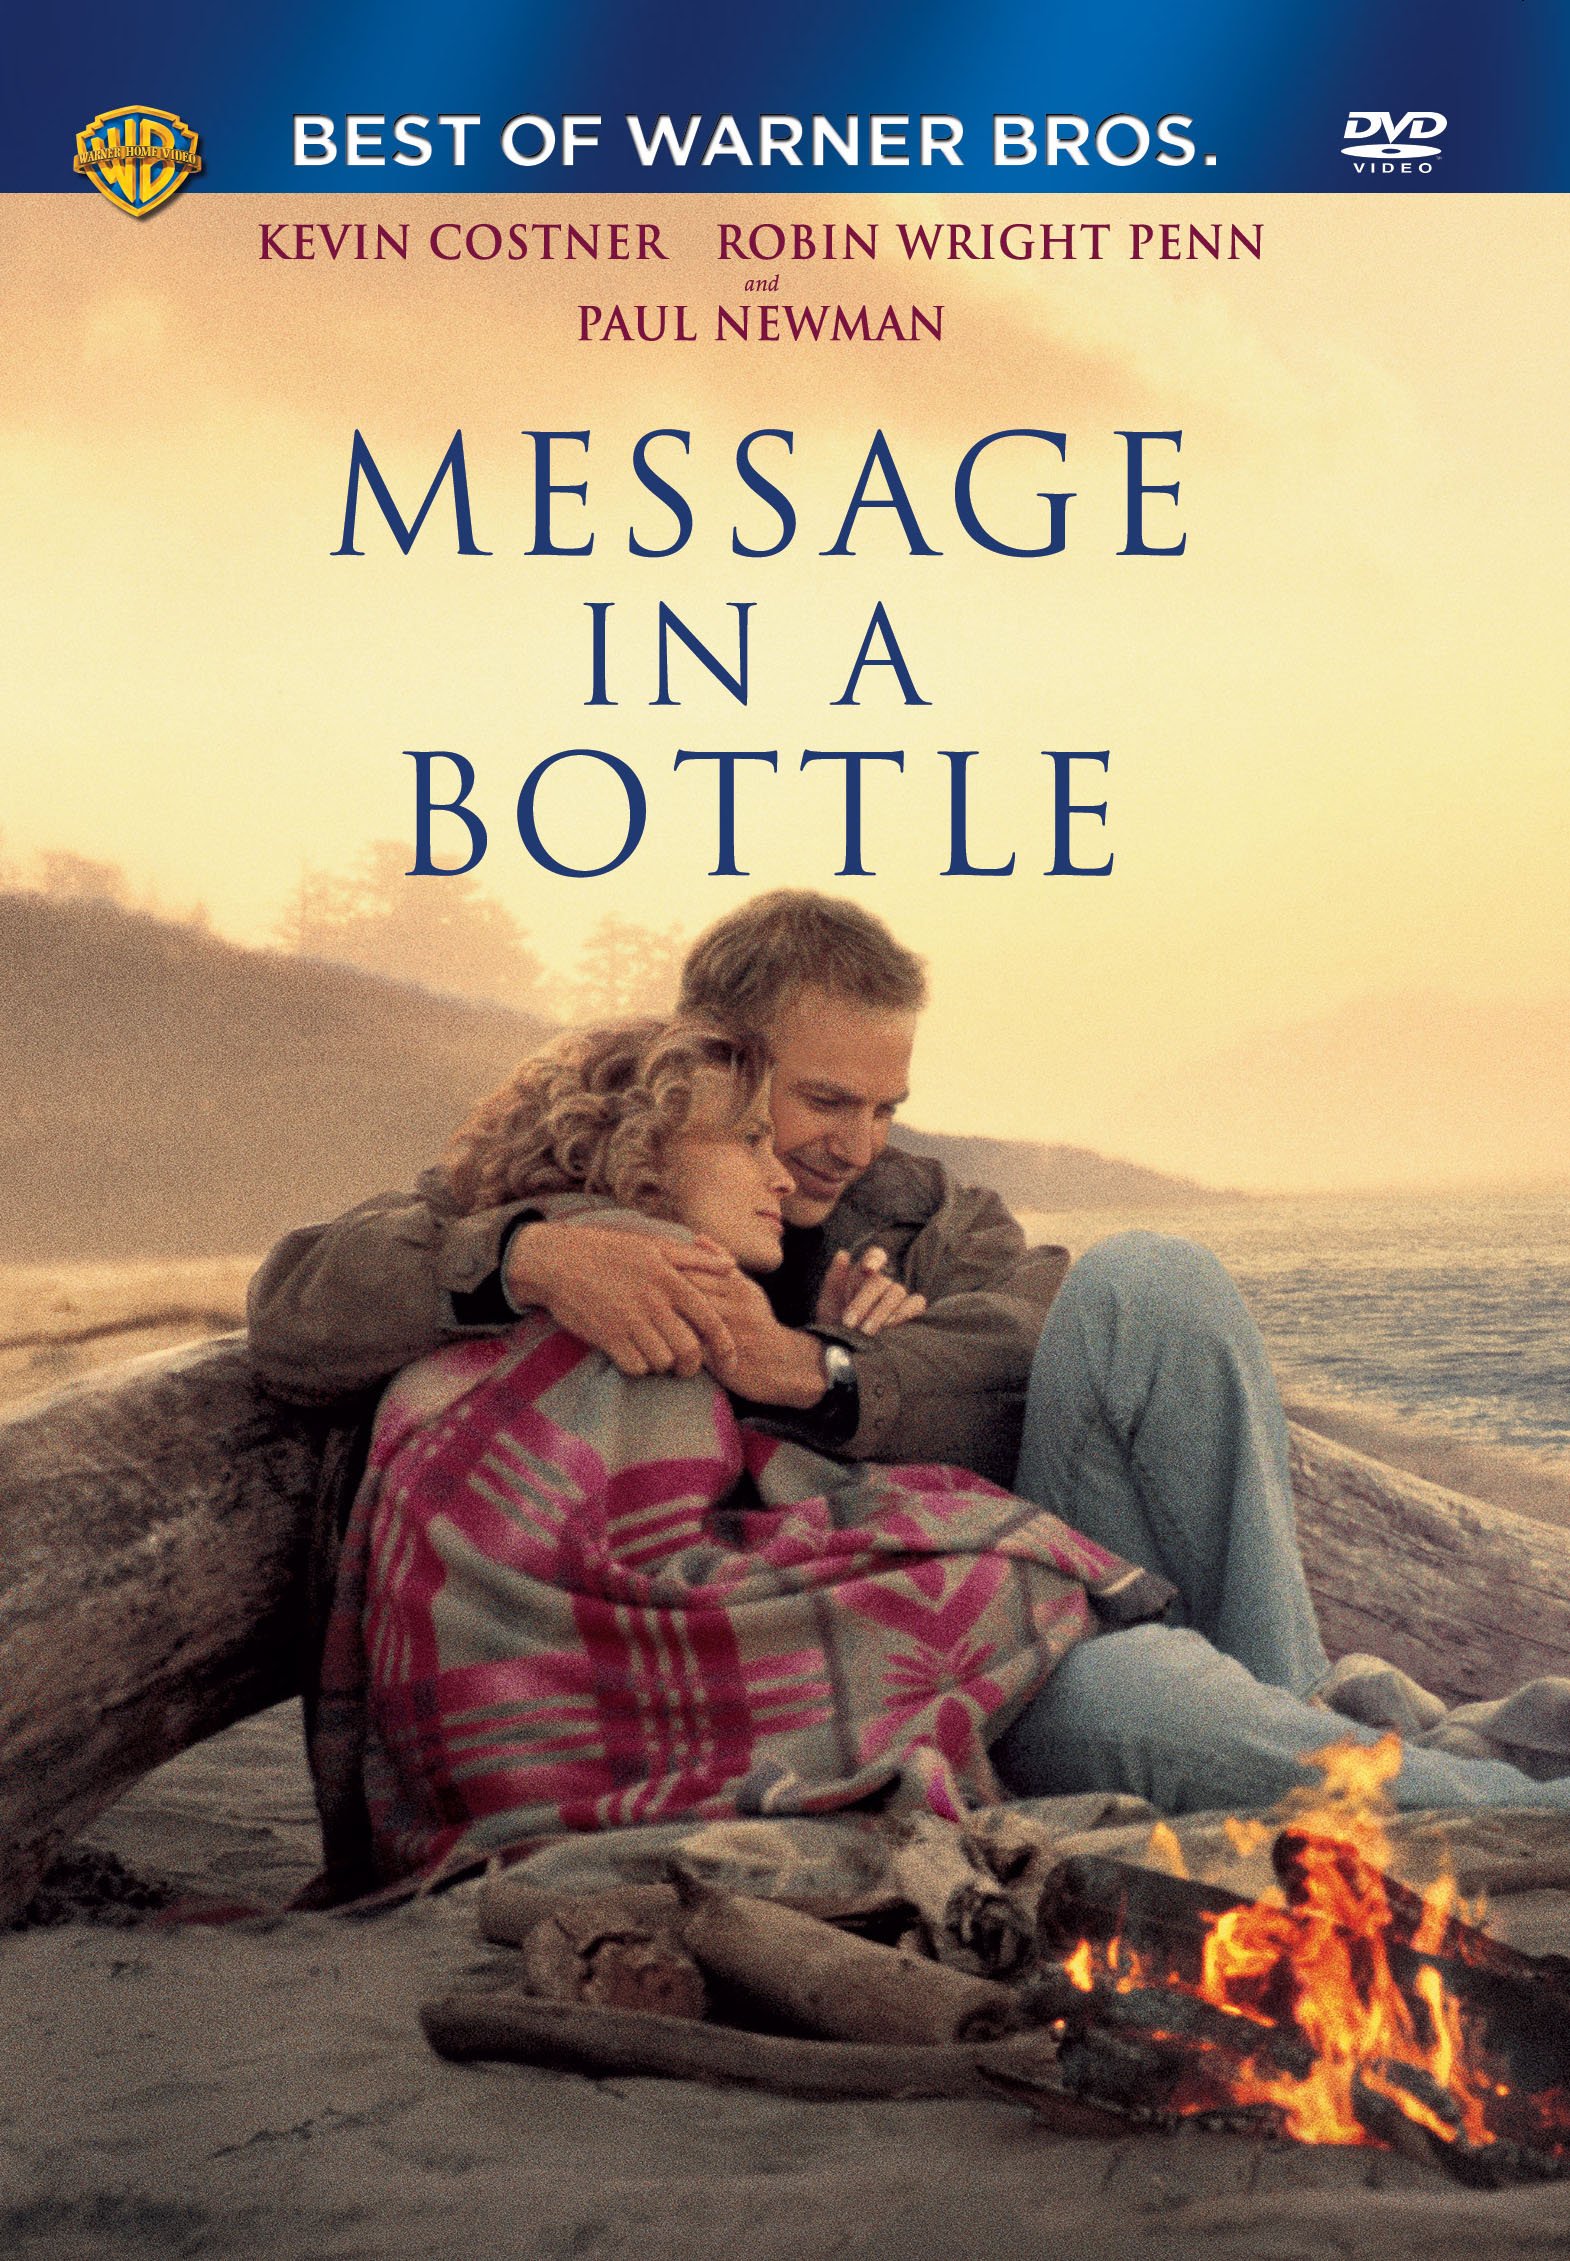 message-in-a-bottle-movie-purchase-or-watch-online